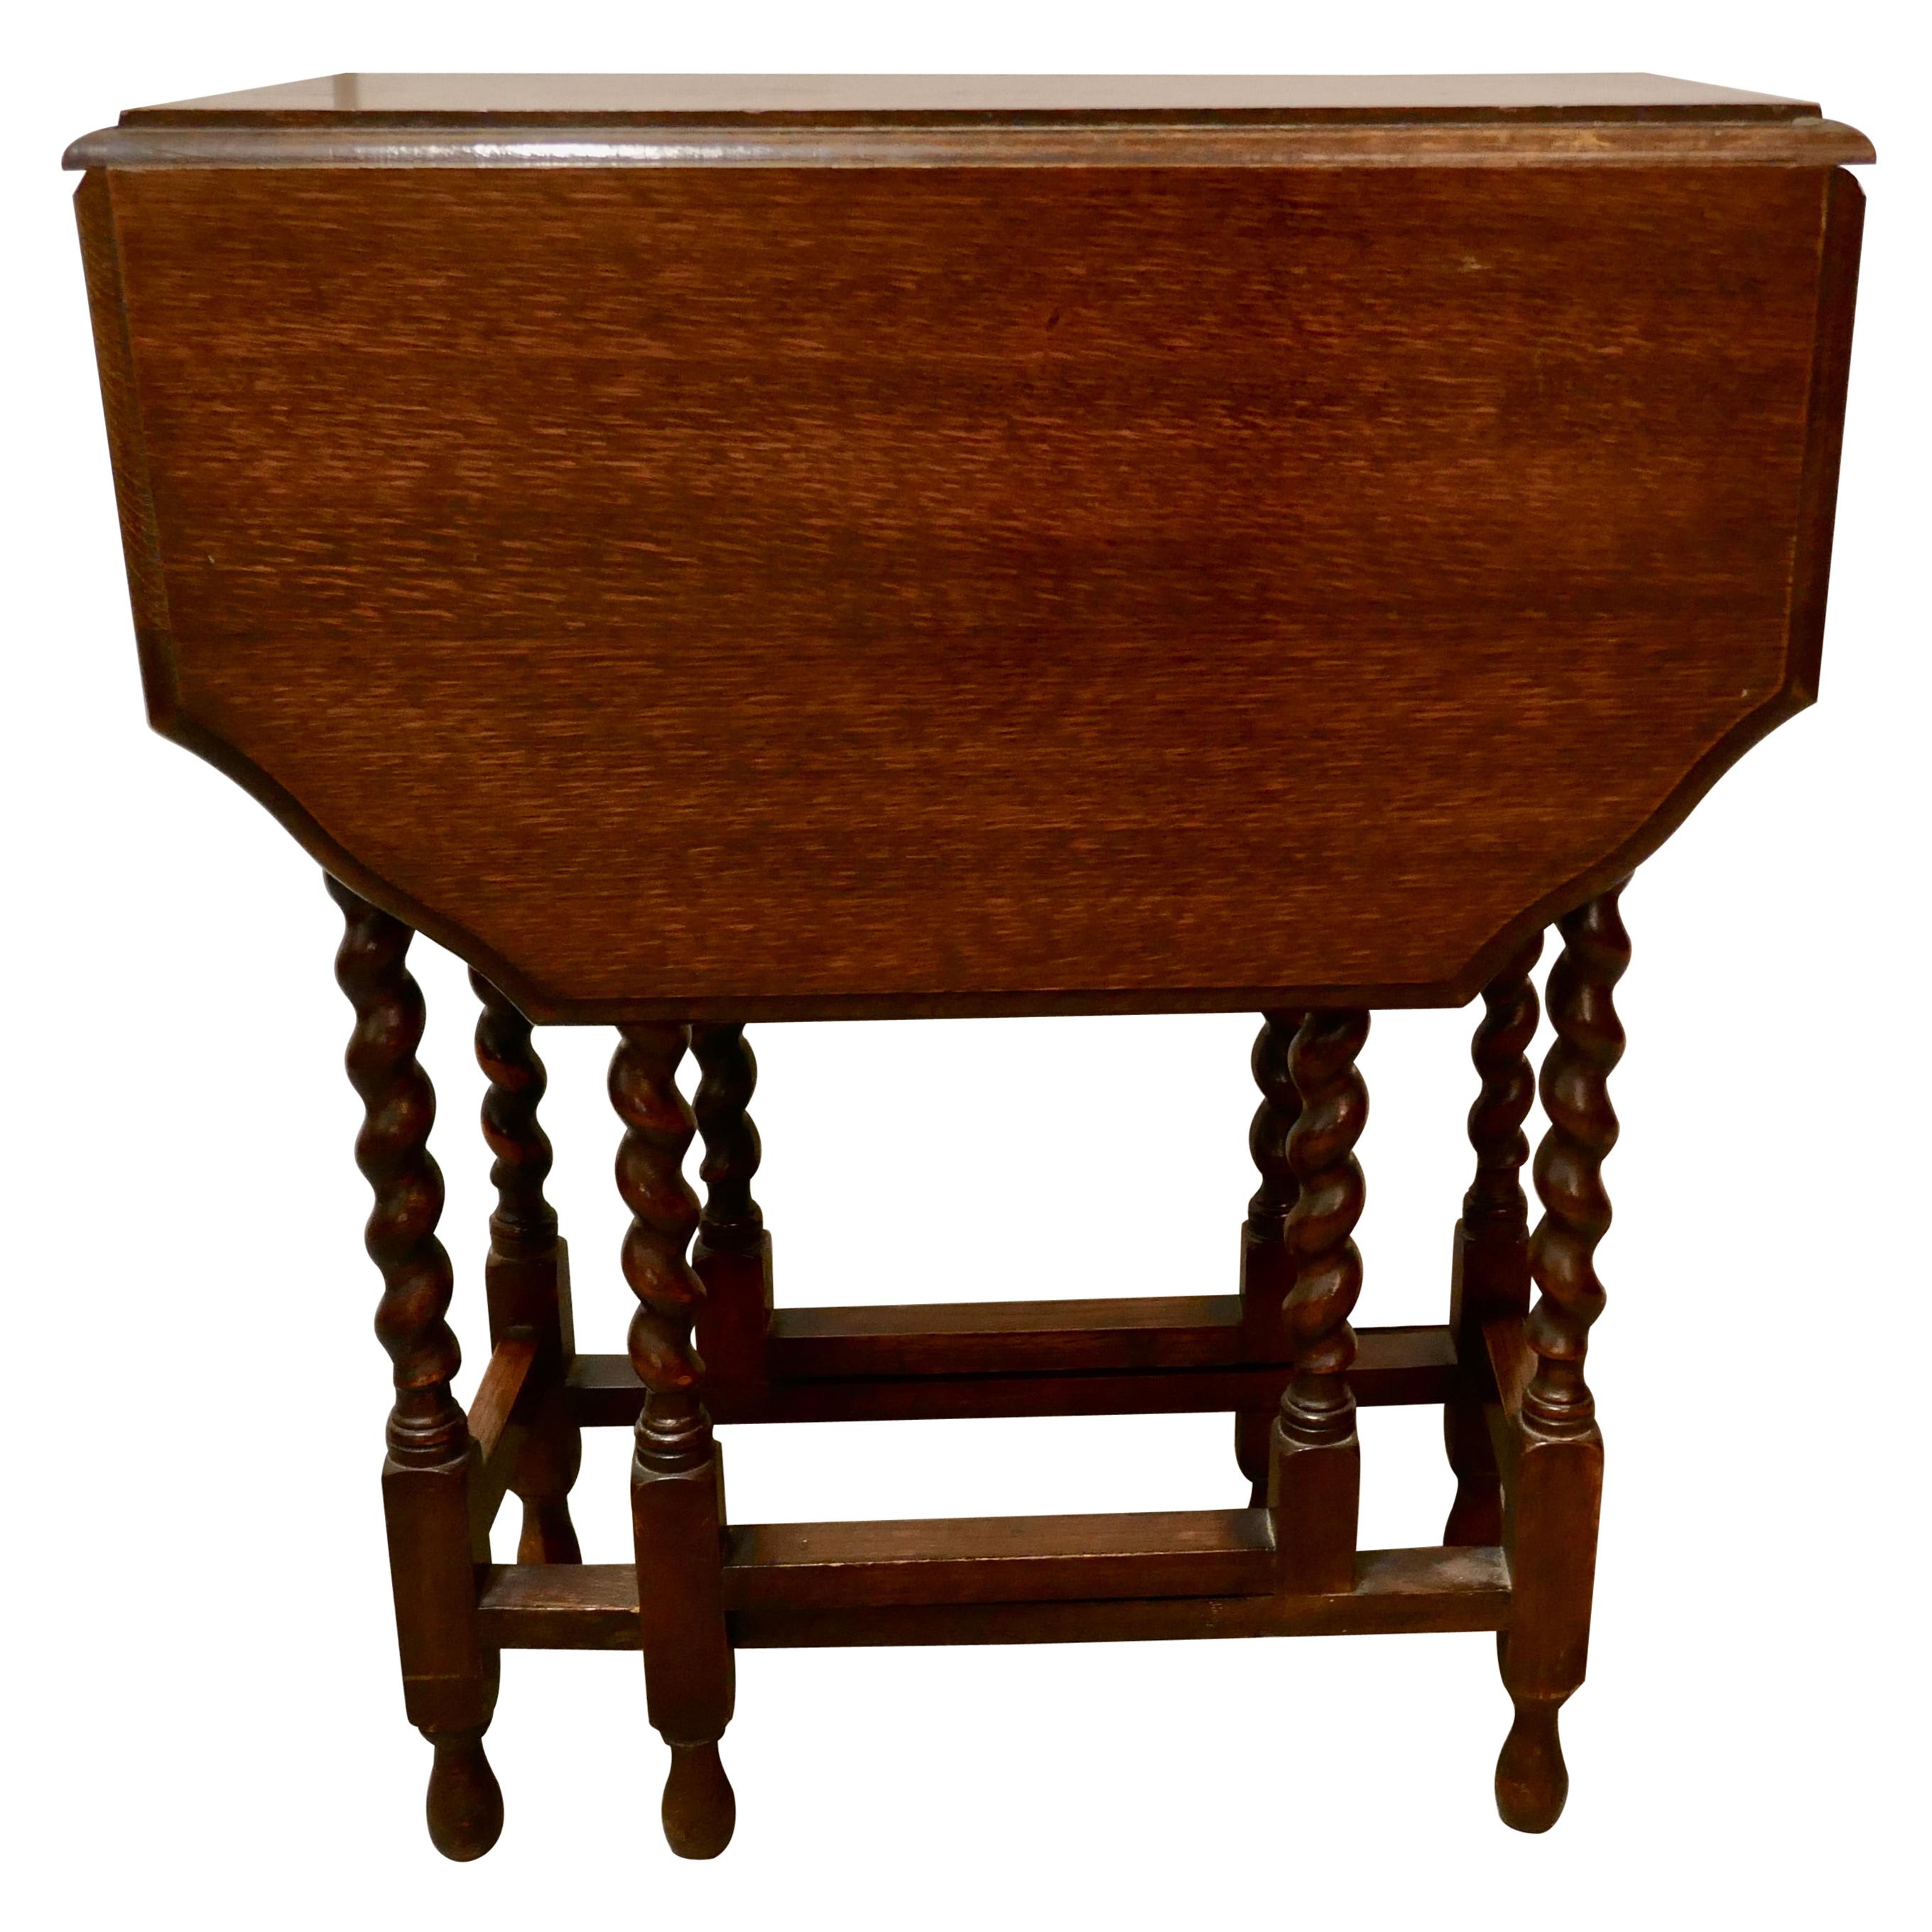 This is a Good Solid Oak Victorian Gate Leg Table